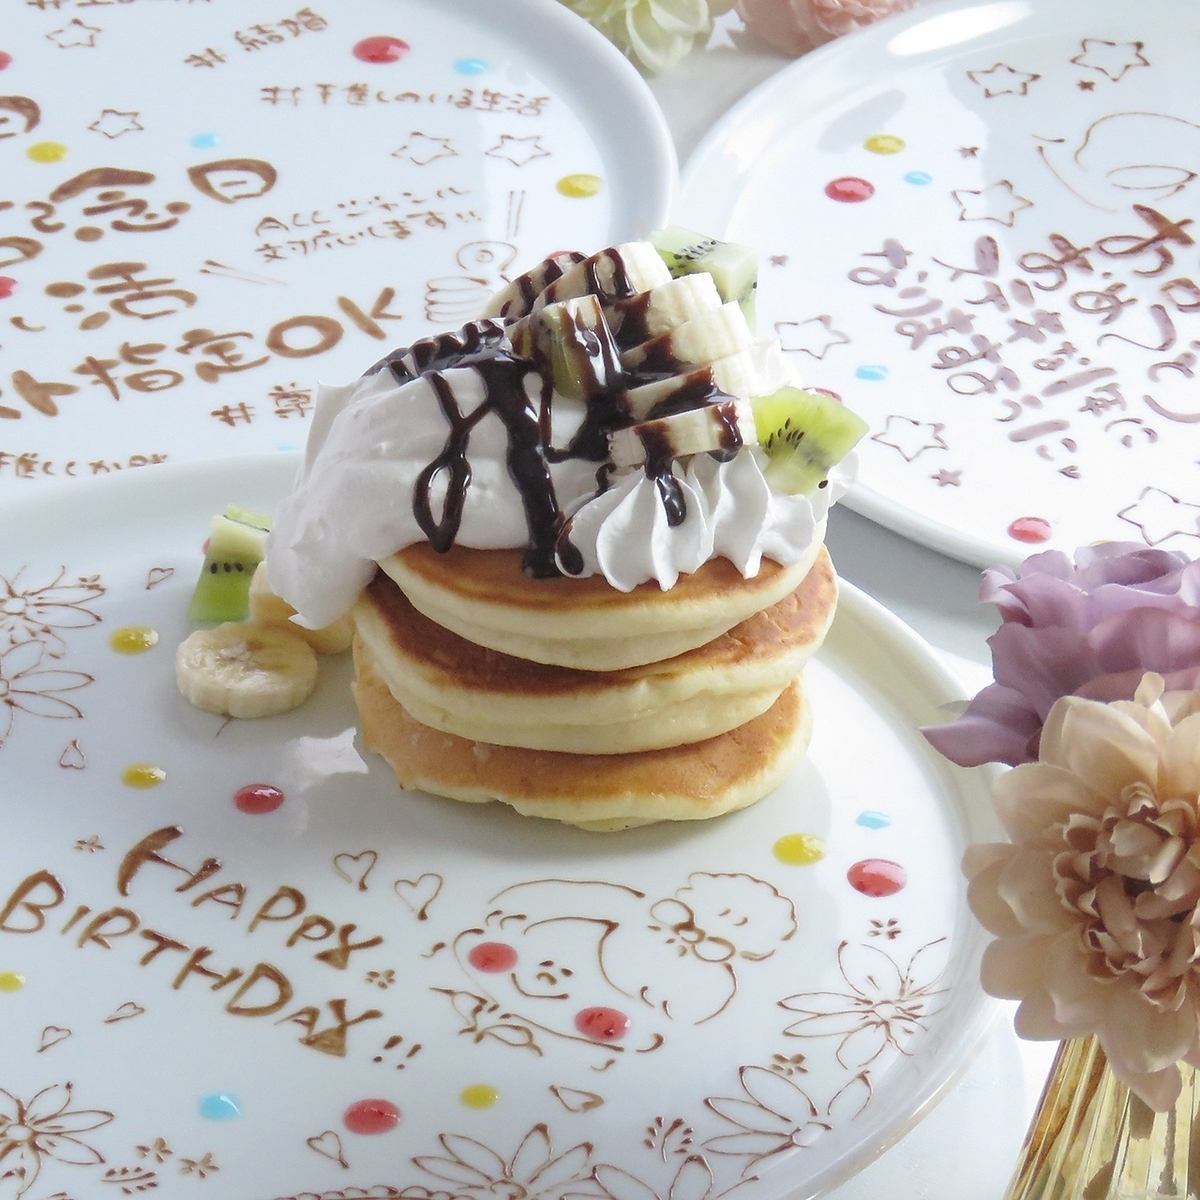 A plate with a message is available for +1,100 yen.A waffle plate too!